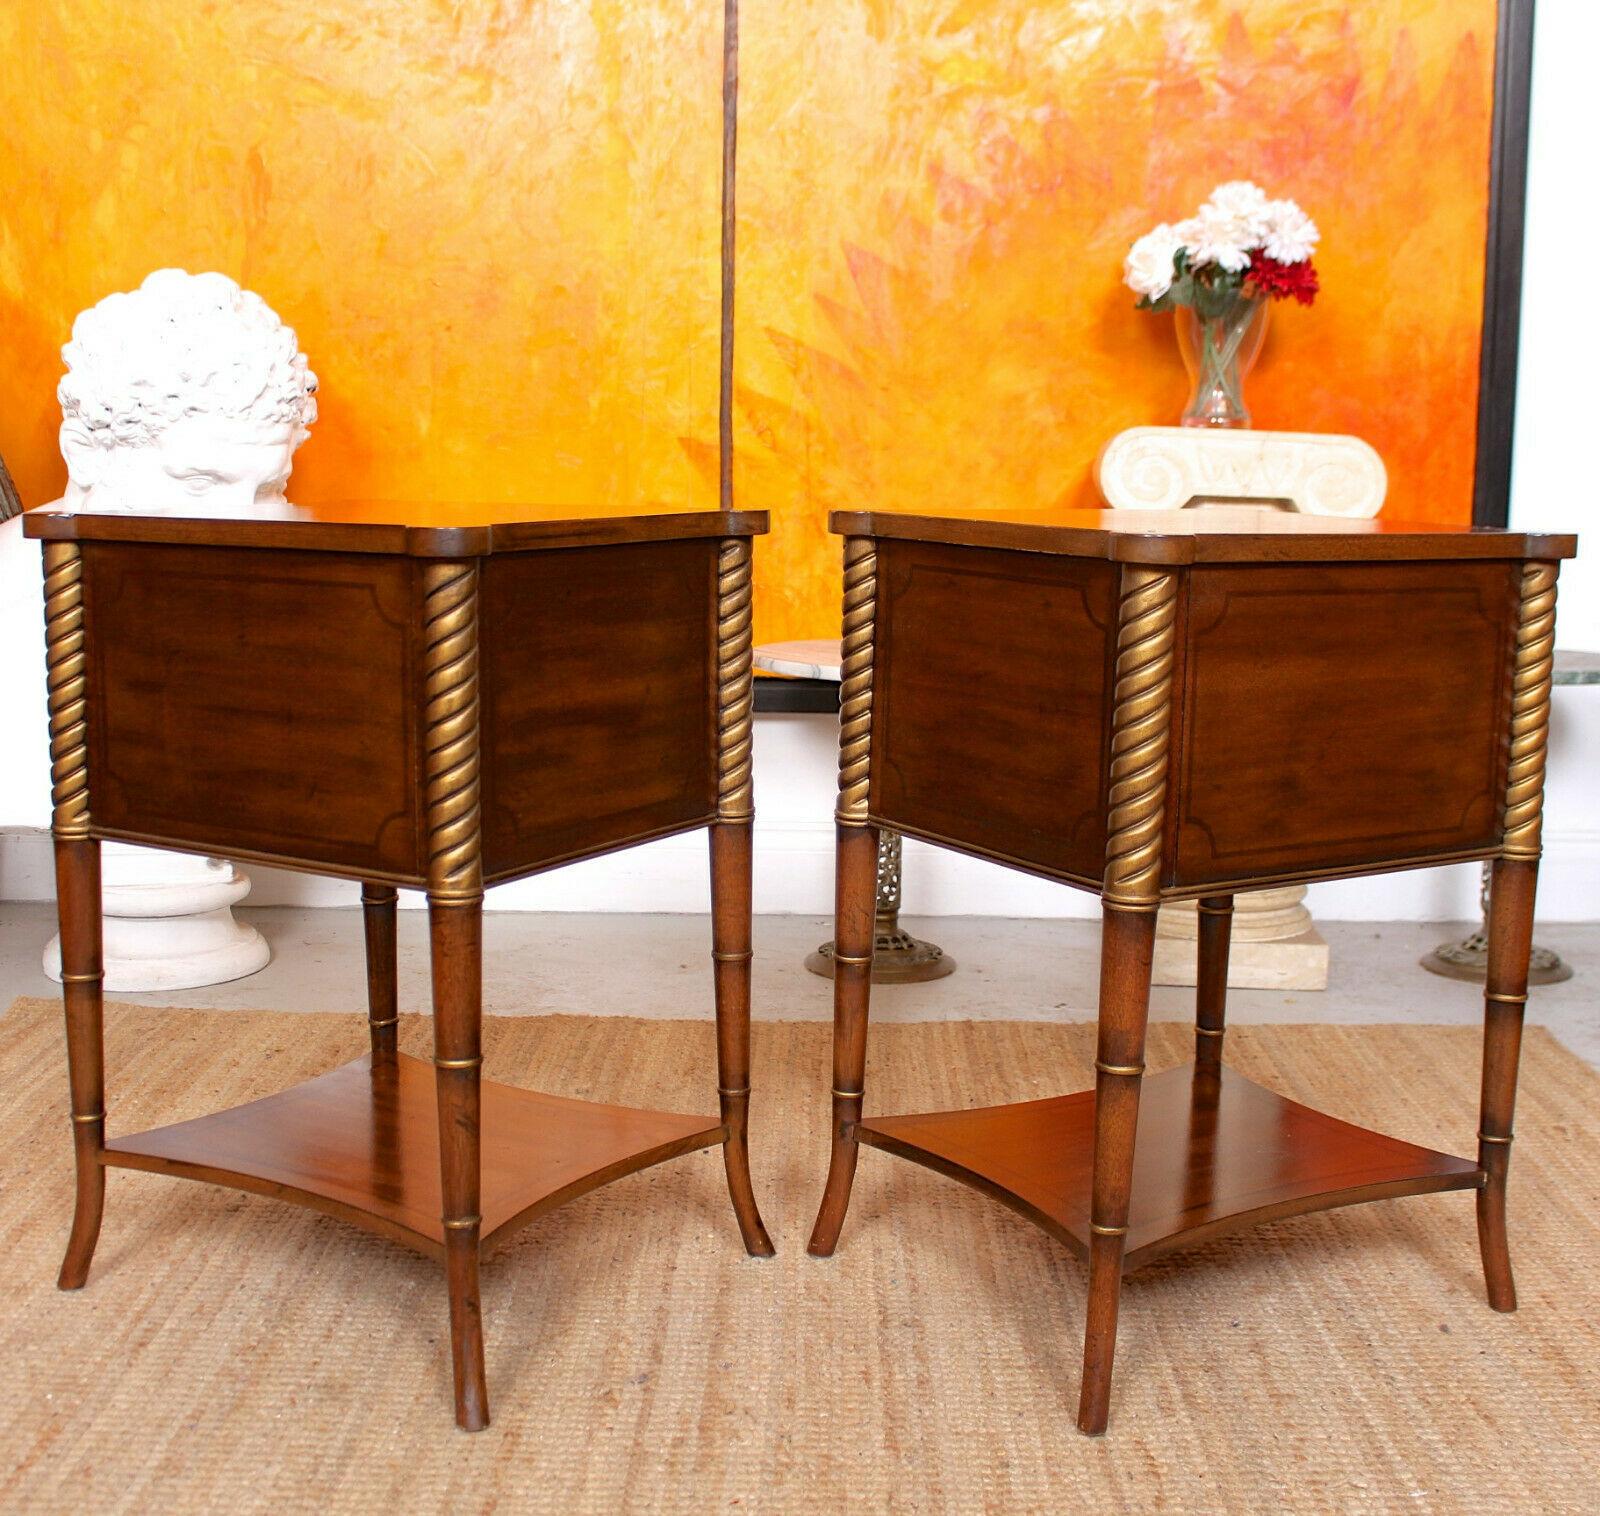 Pair of Side Tables Inlaid Mahogany Drexel Heritage Bedside Chest of Drawers 6